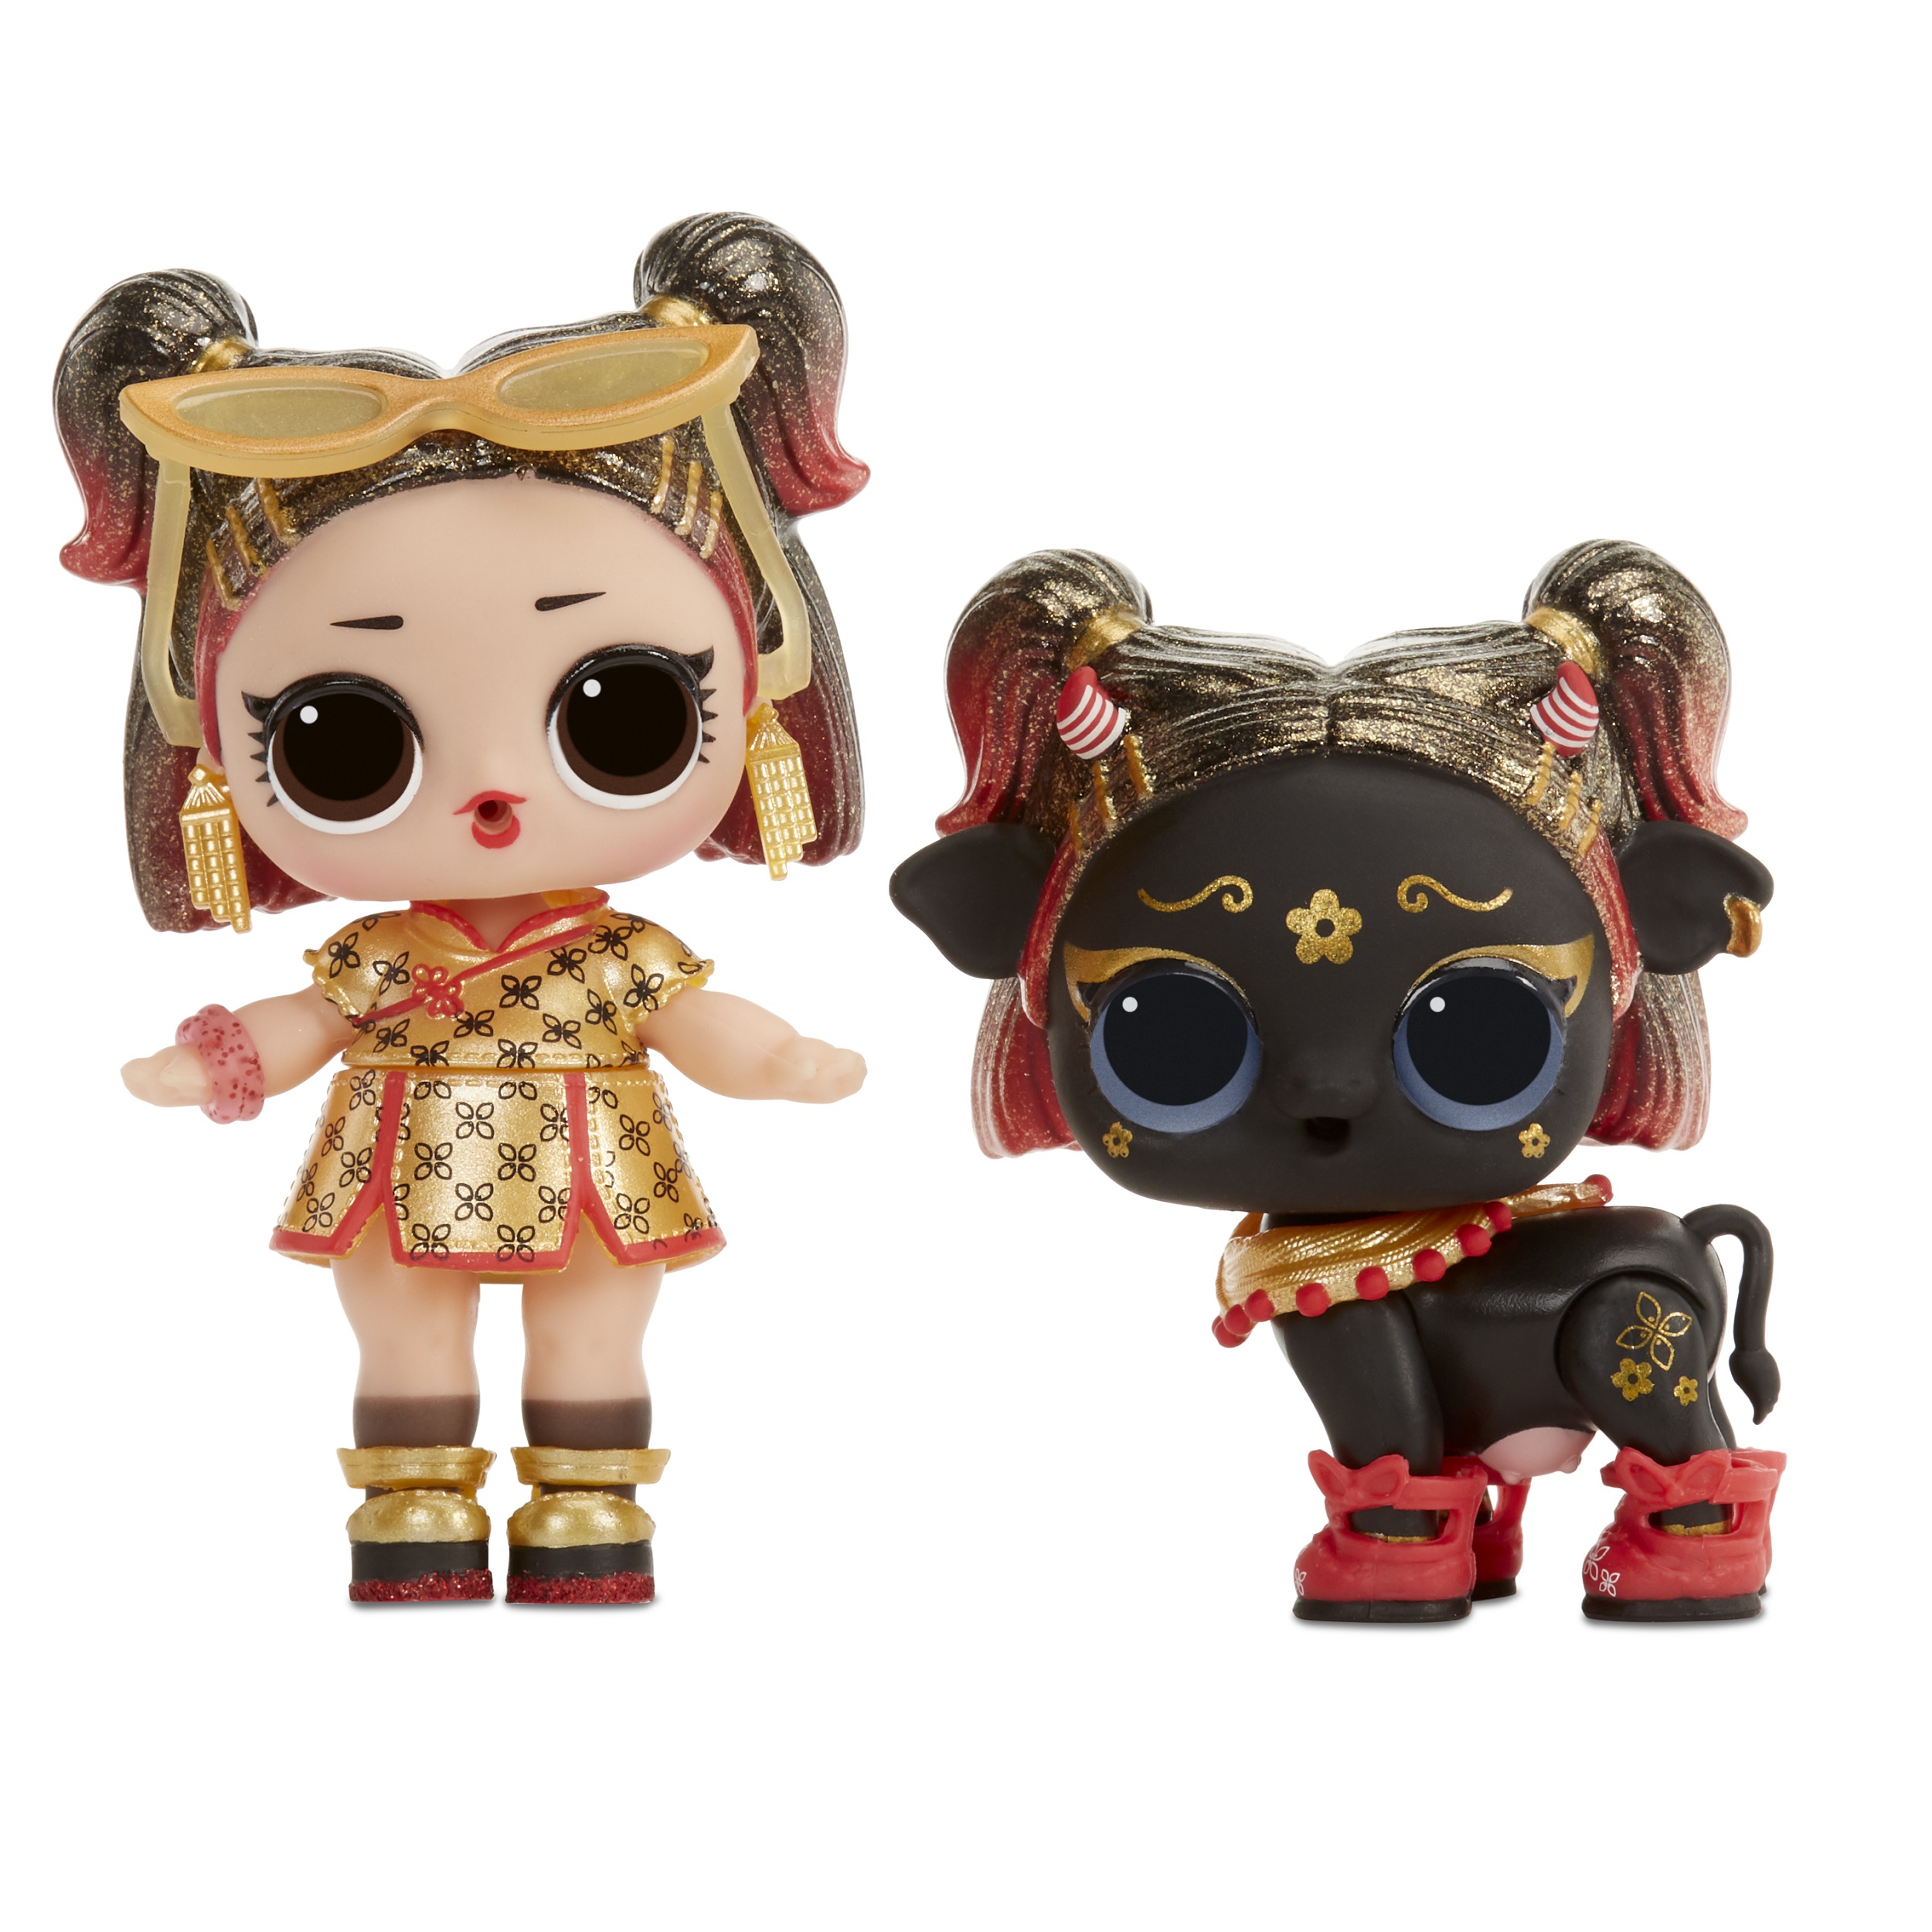 LOL Surprise Year Of The Ox Doll or Pet With 7 Surprises, Lunar New Year Doll or Pet, Accessories. - image 1 of 5